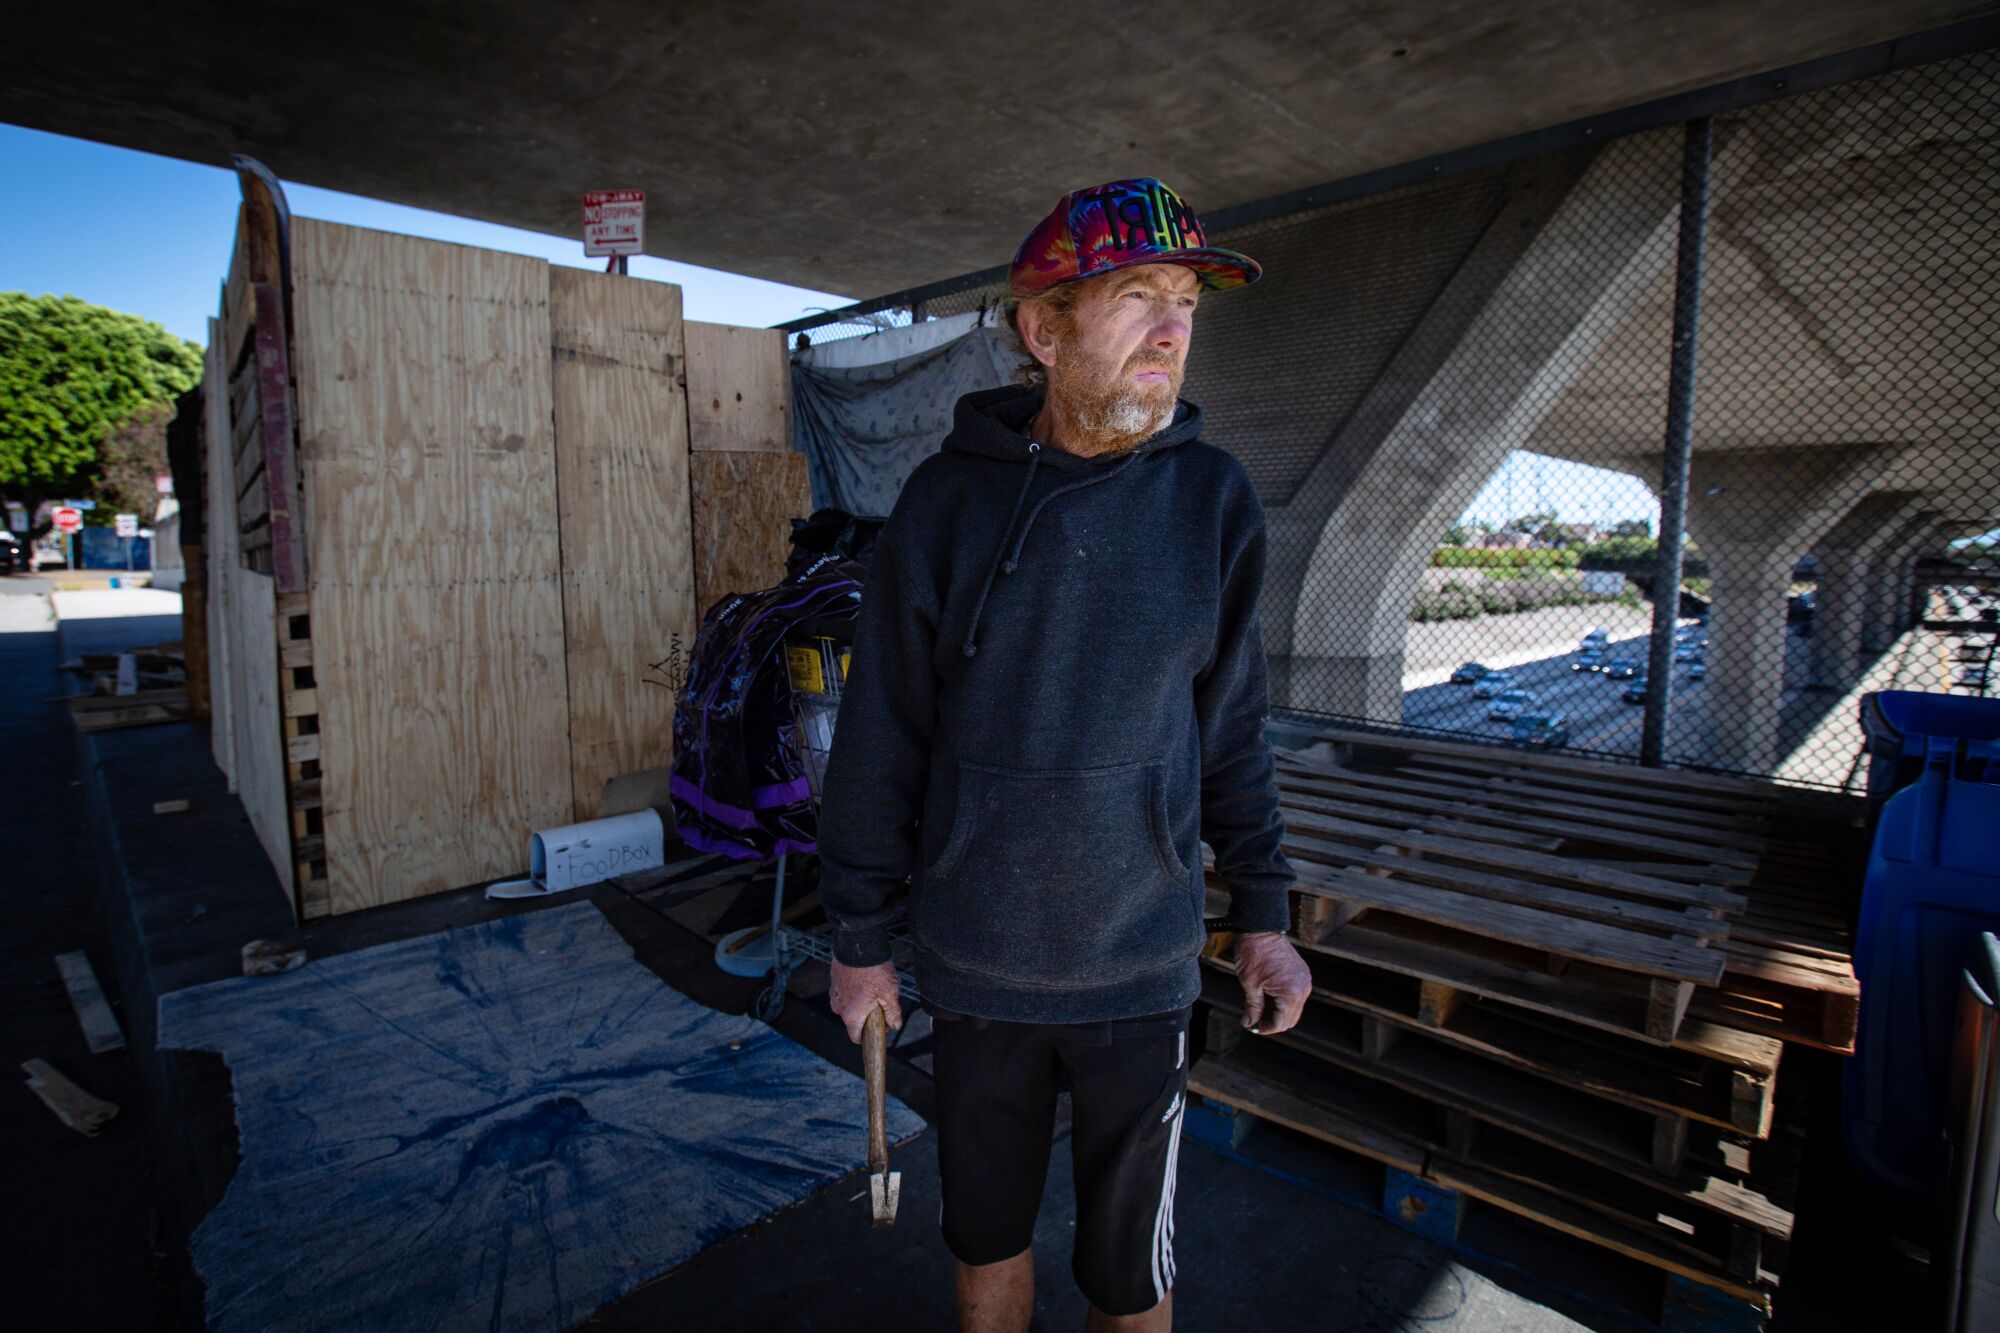 Kenny Welch stands in front of his living structure on a 110 Freeway overpass.